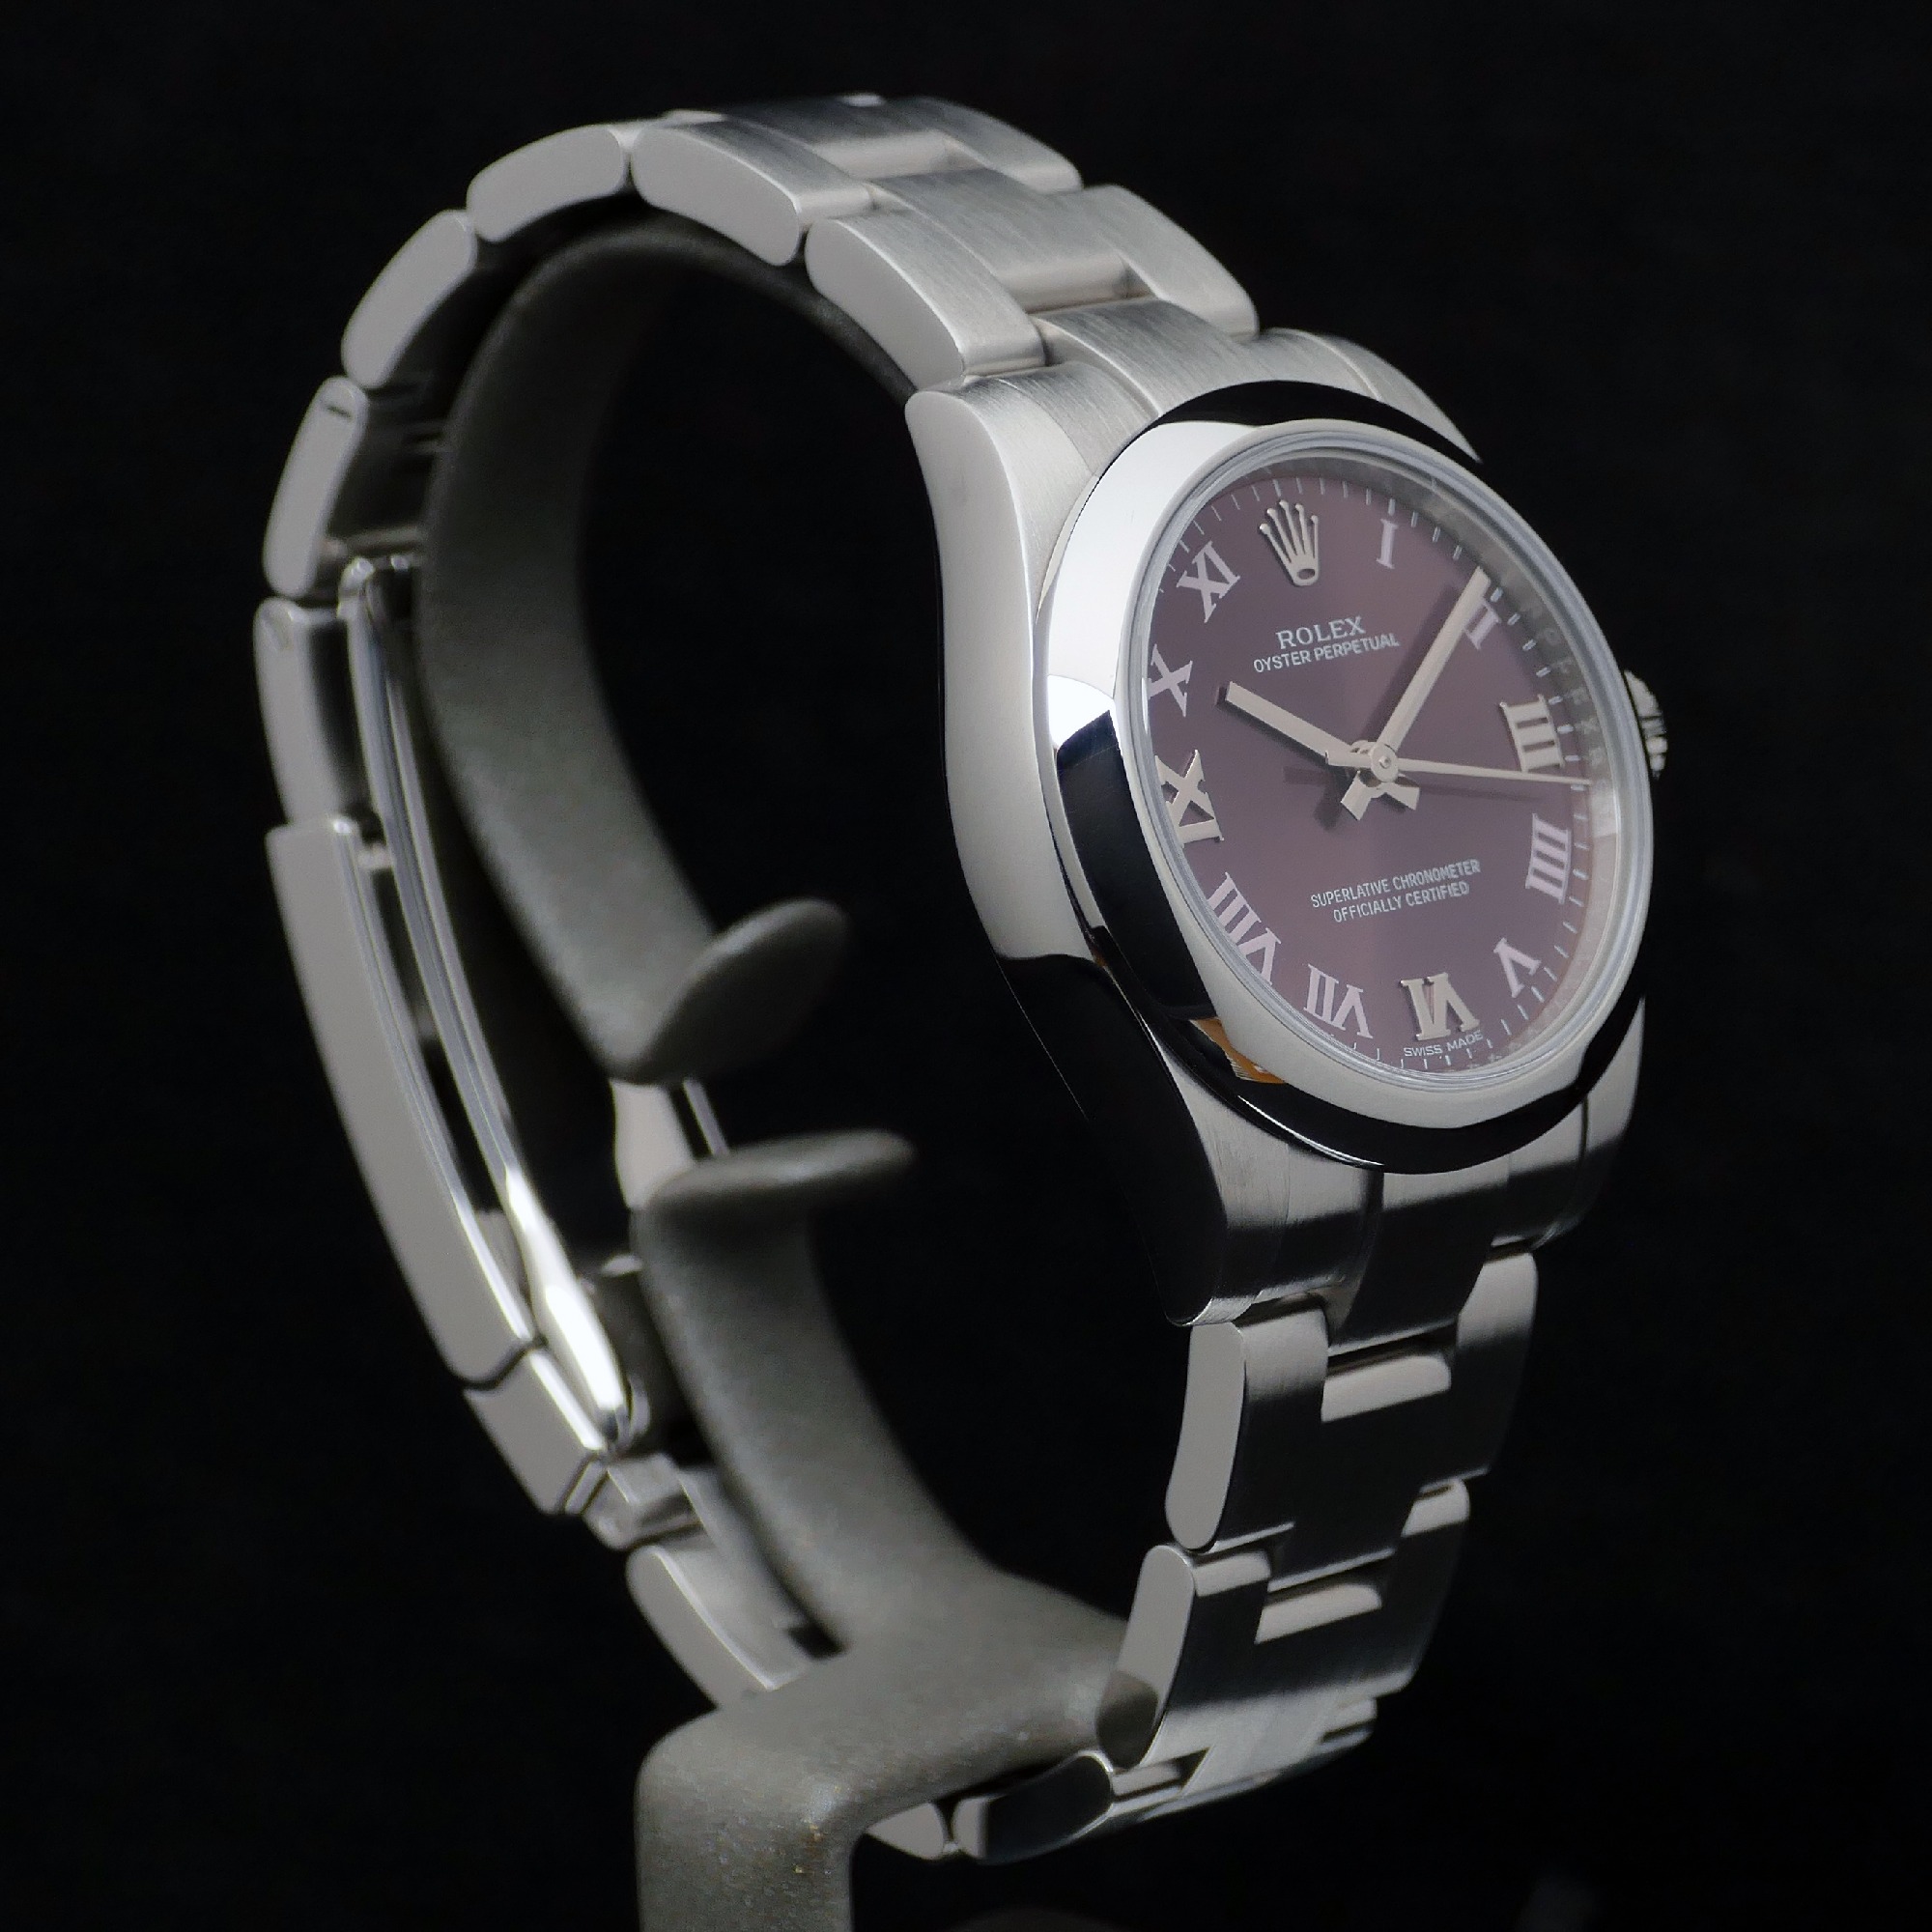 Oyster Perpetual 31